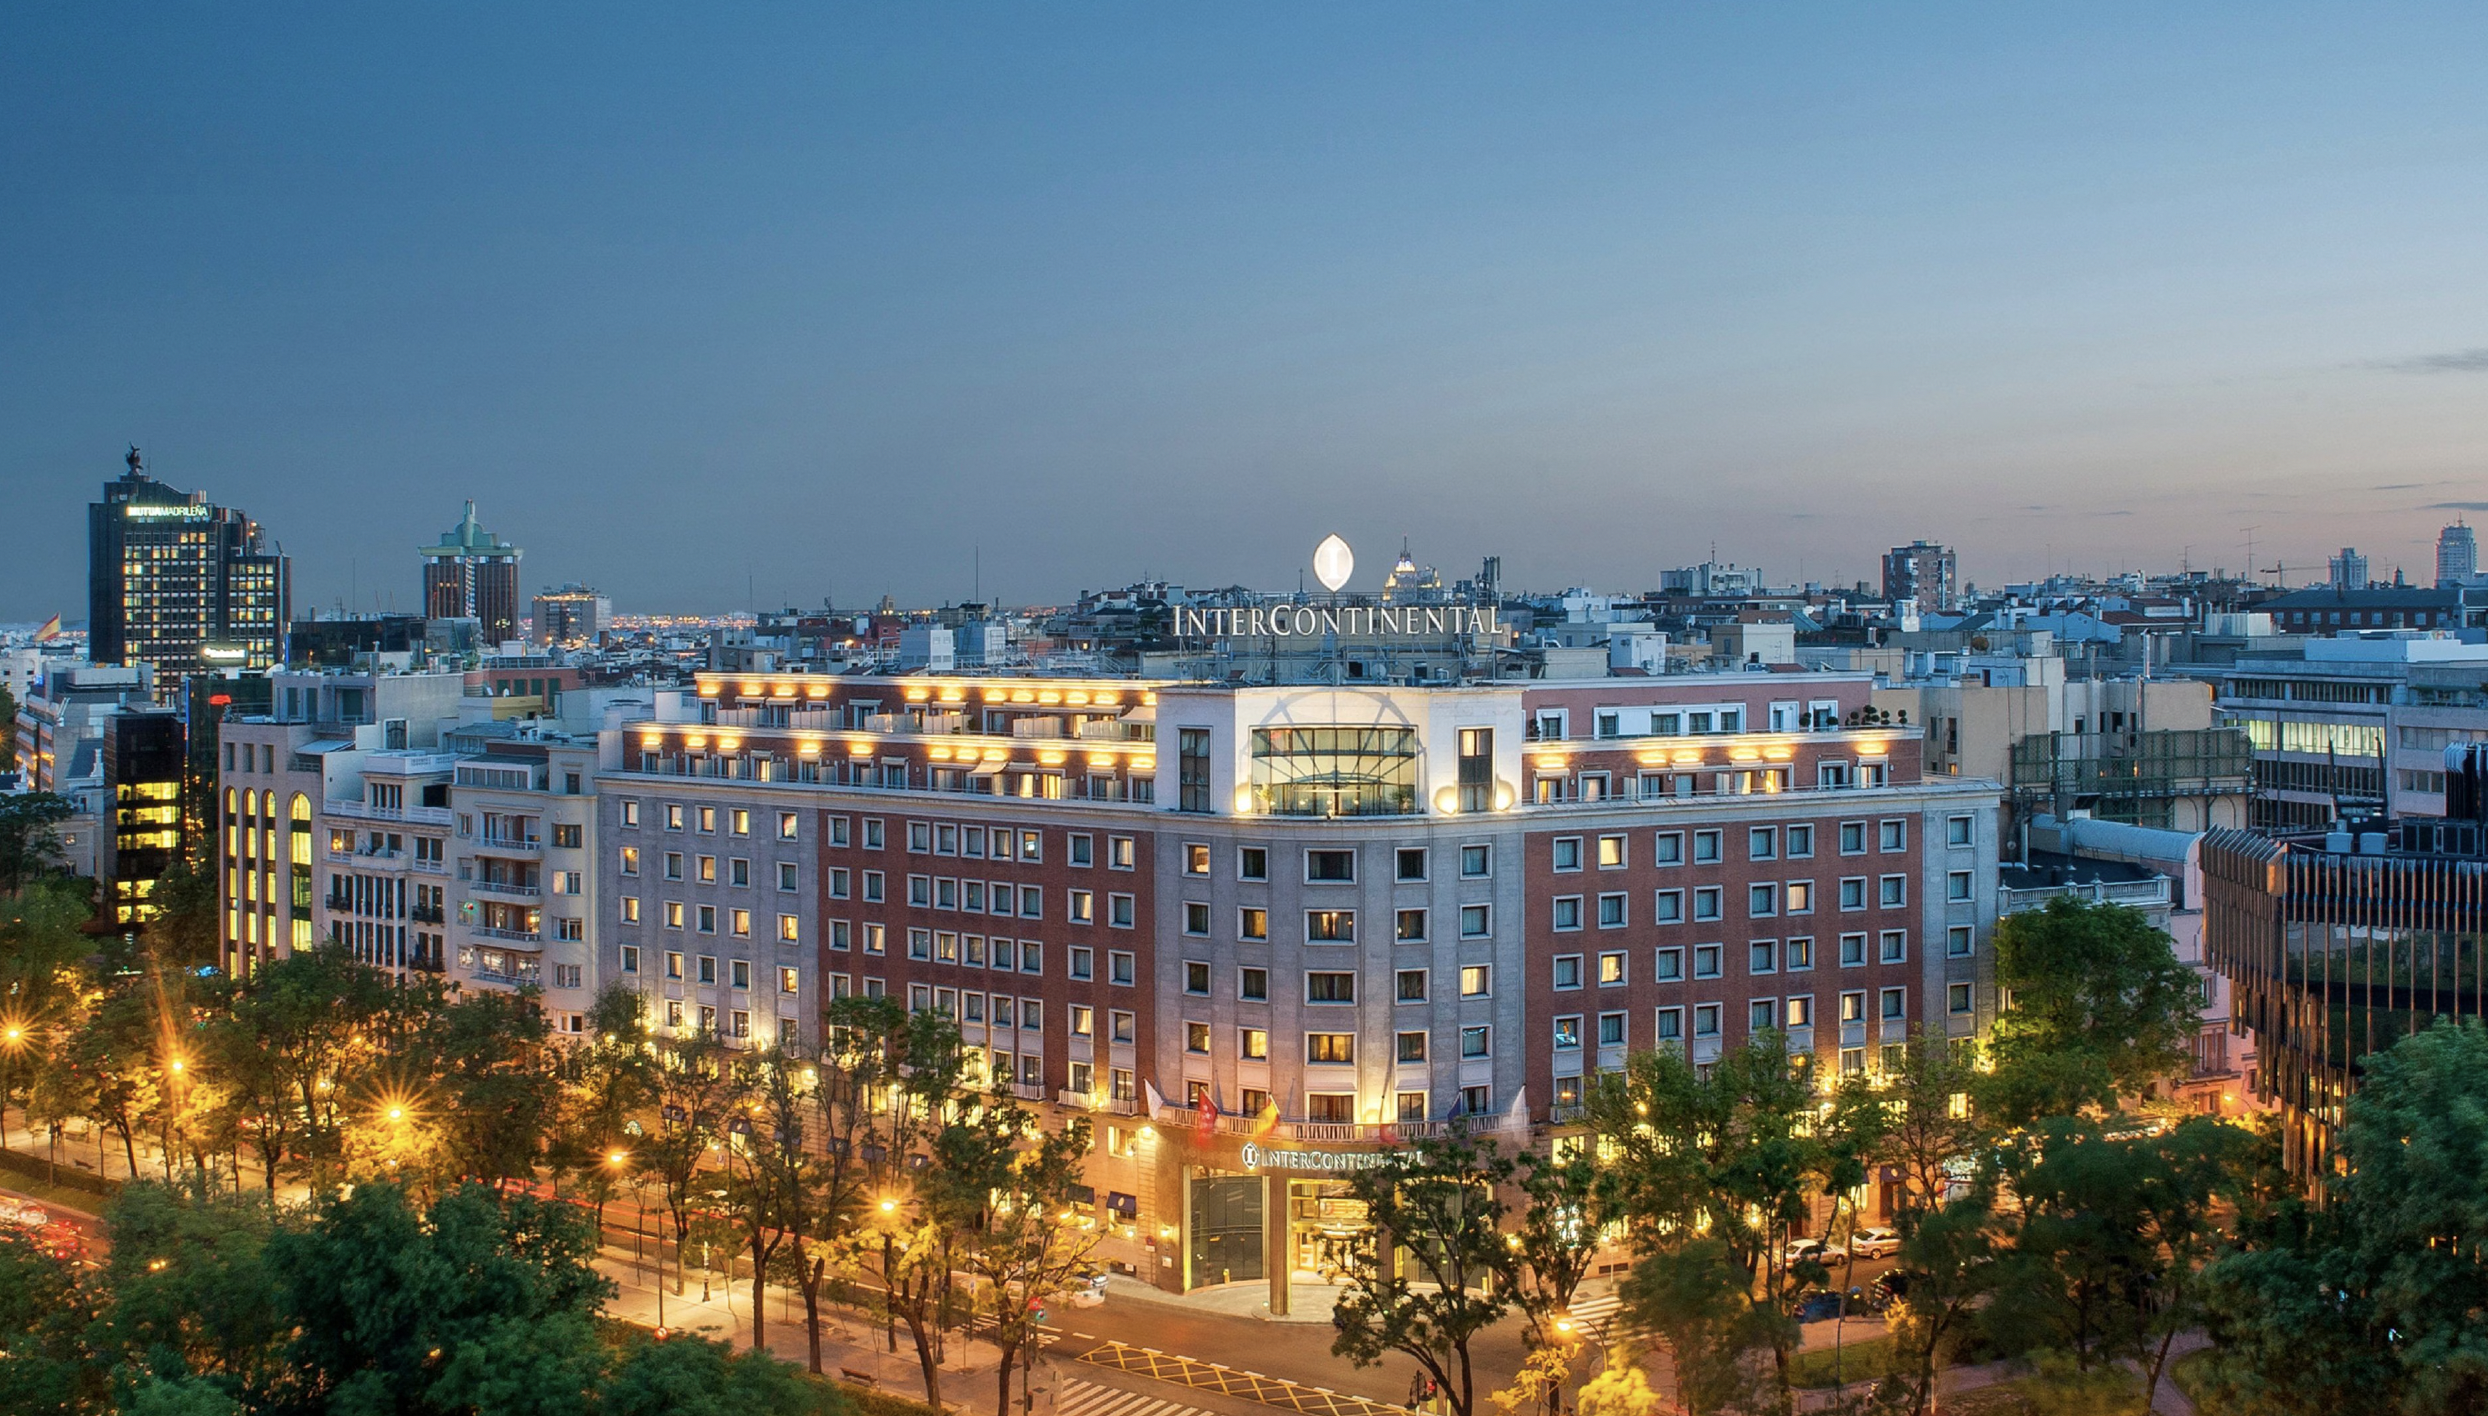 InterContinental Madrid: Where luxury meets history and culture